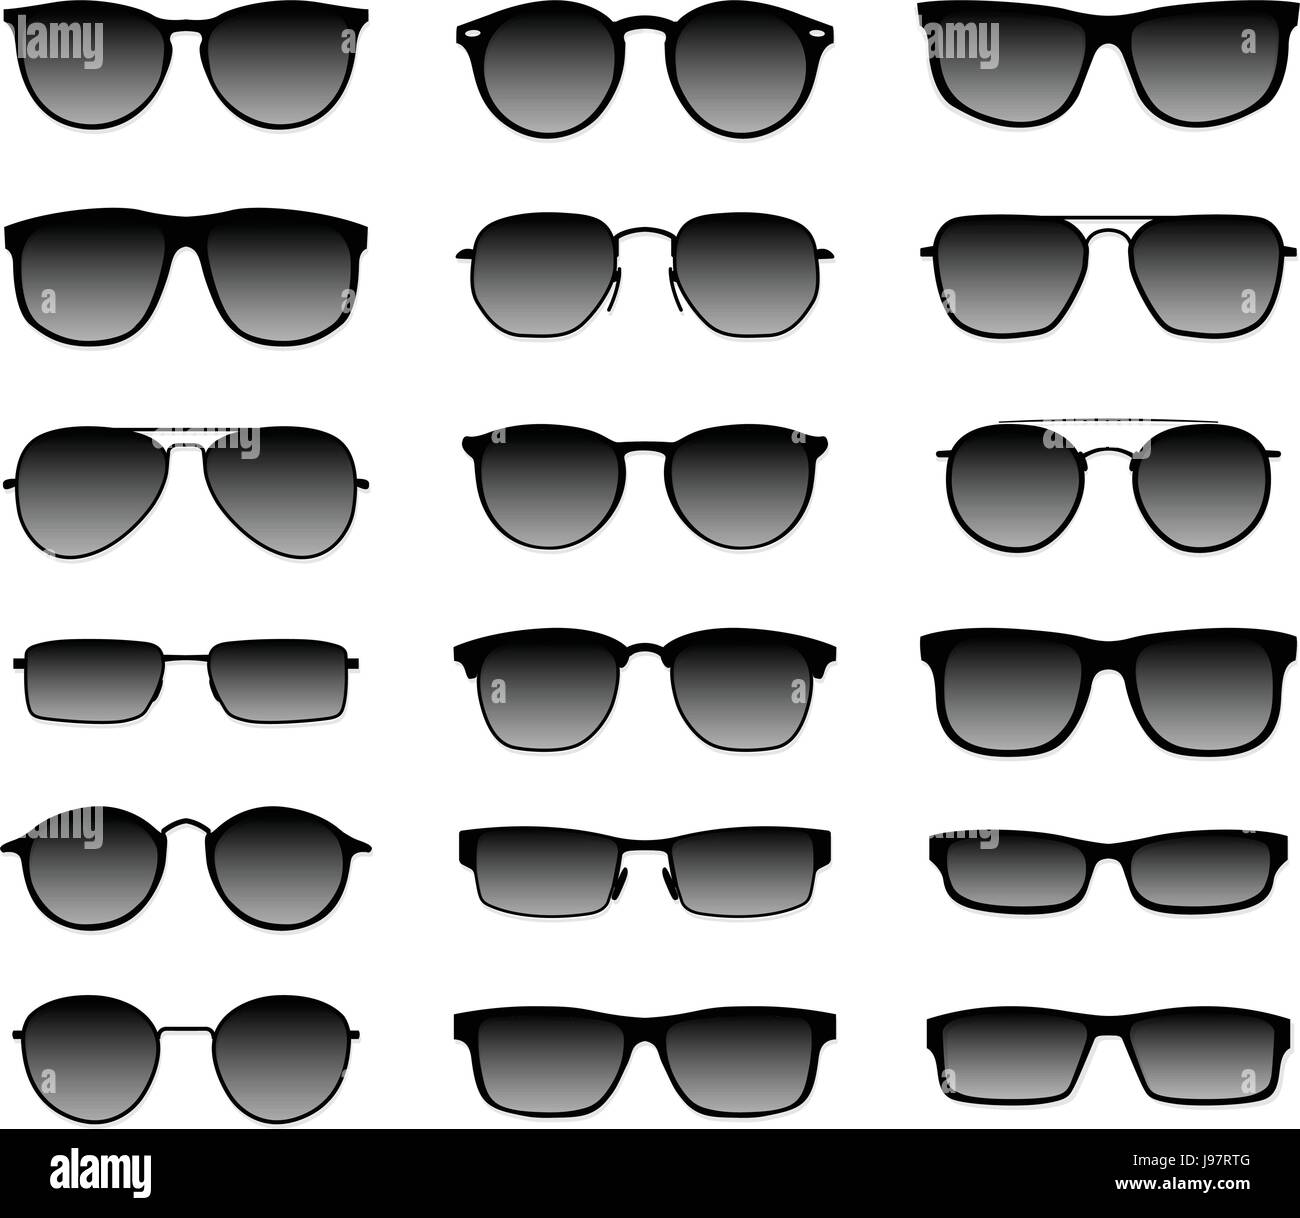 Realistic sunglasses with a translucent black glass in a black frame. Protection from sun and ultraviolet rays. Fashion accessory vector illustration  Stock Vector